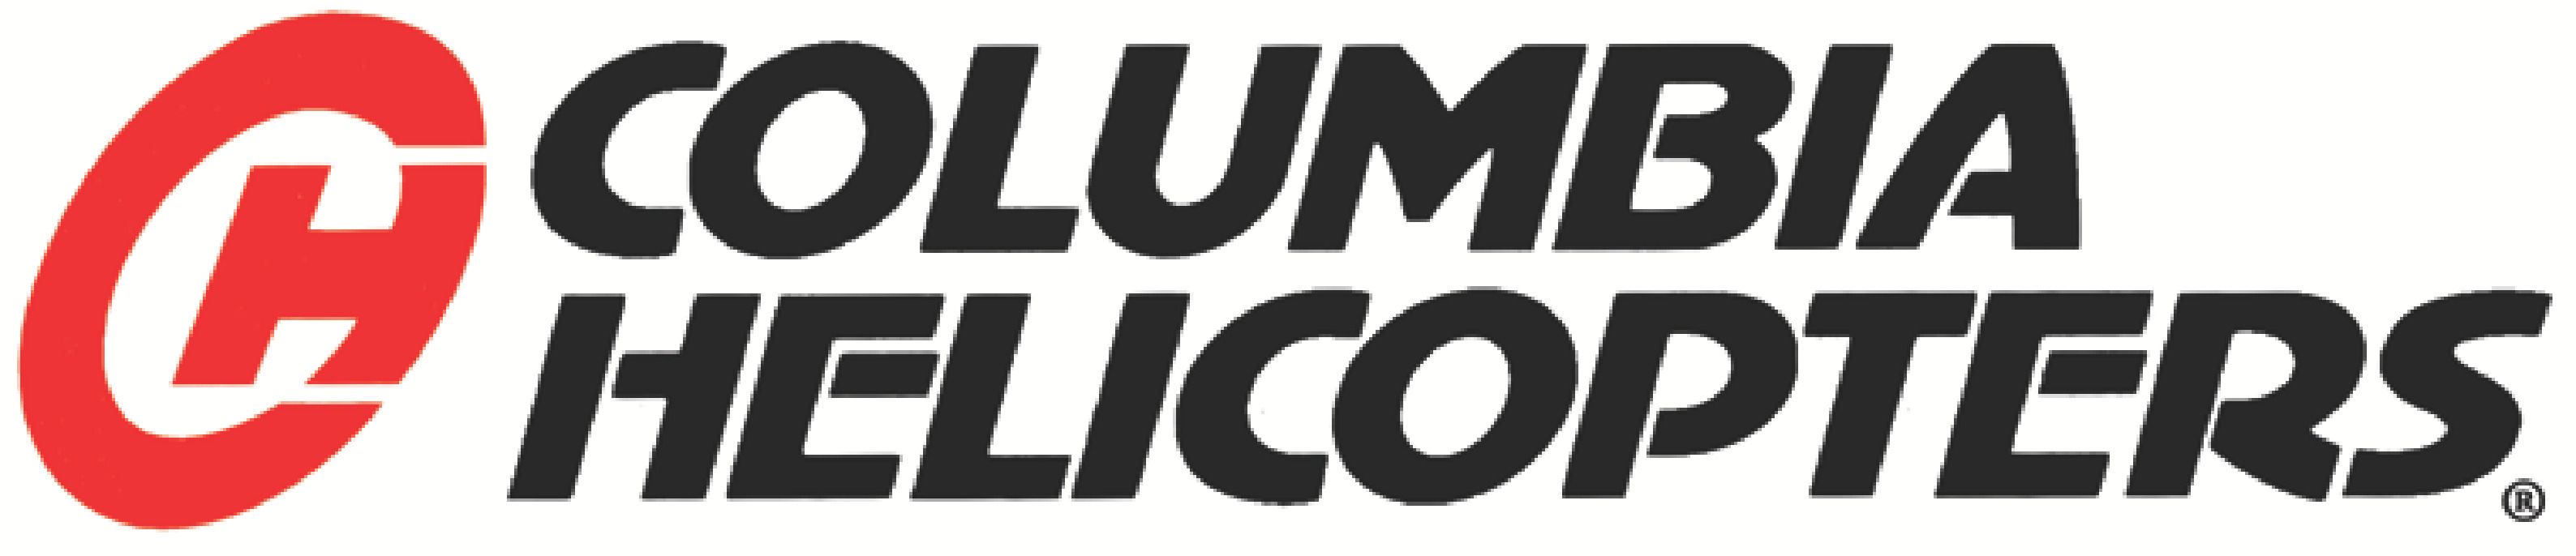 Columbia Helicopters, Inc.